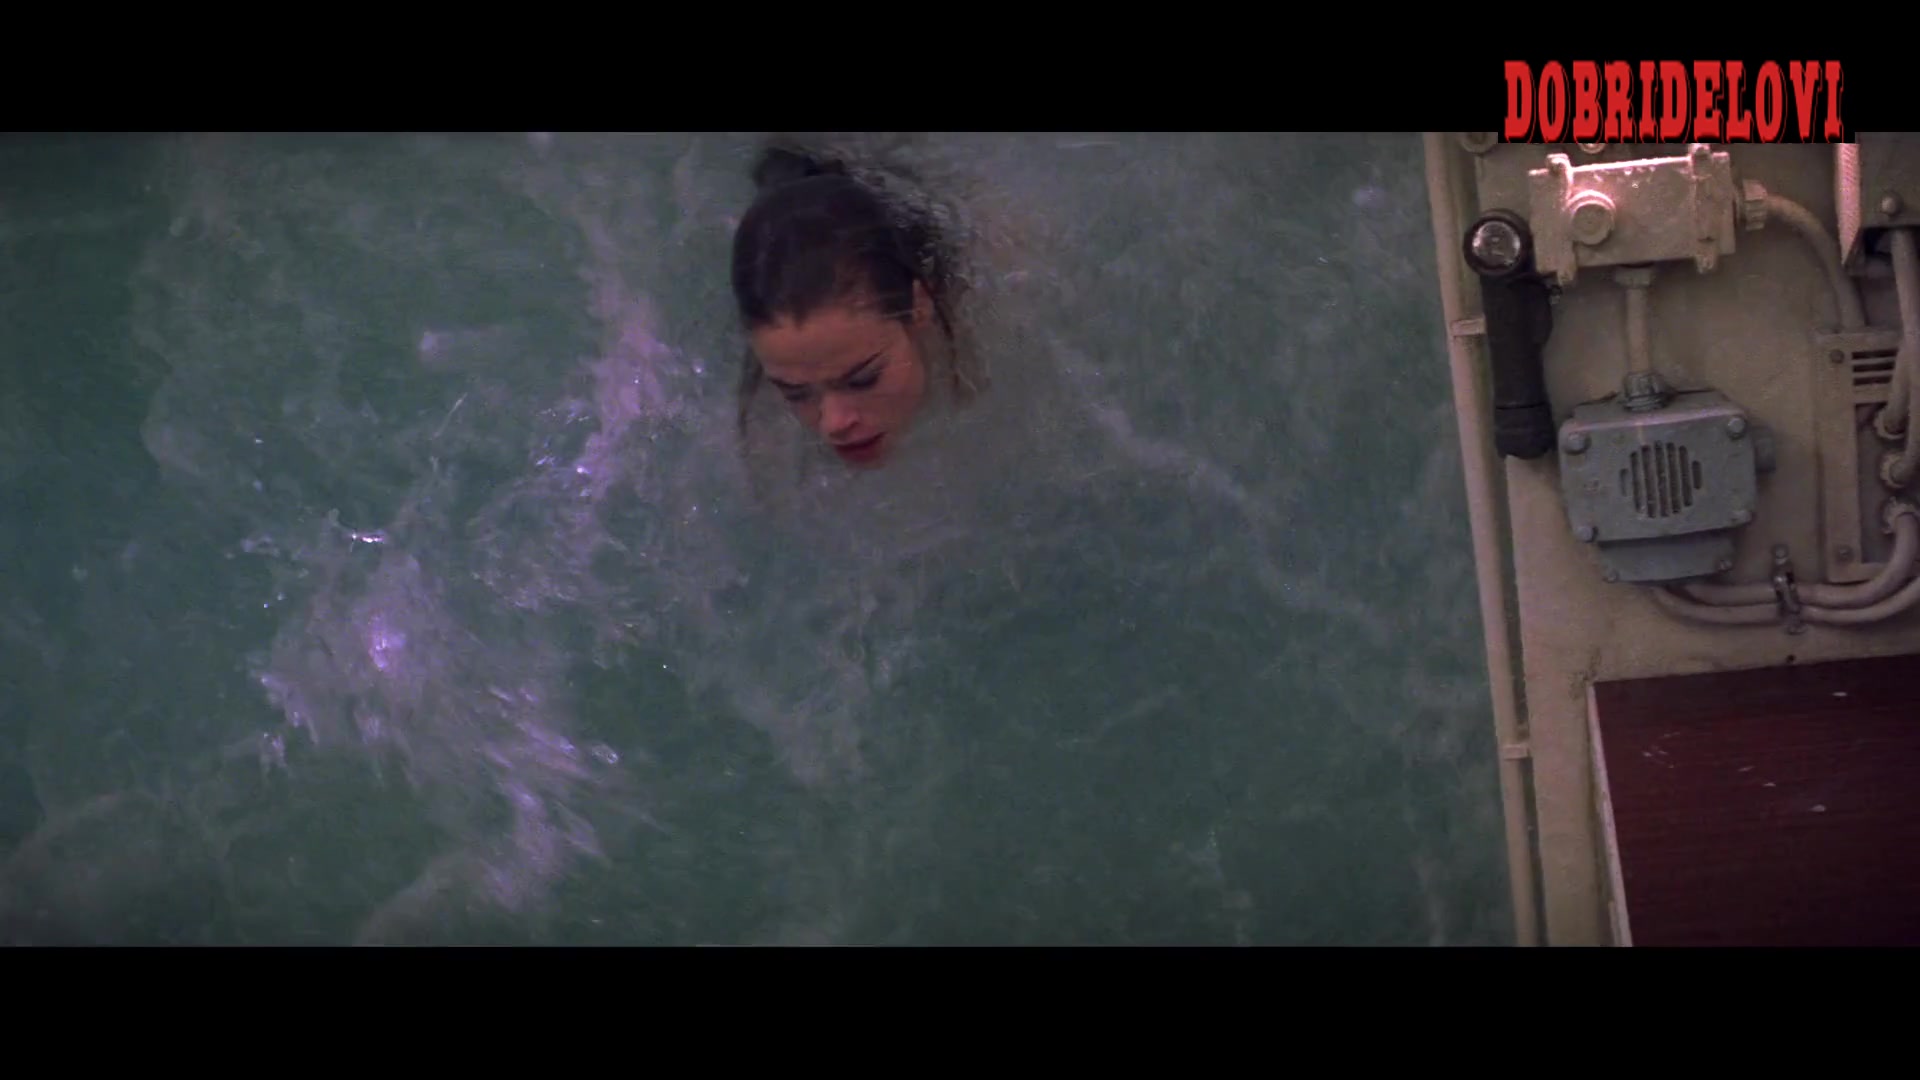 Denise Richards underwater pokies scene from The World is Not Enough